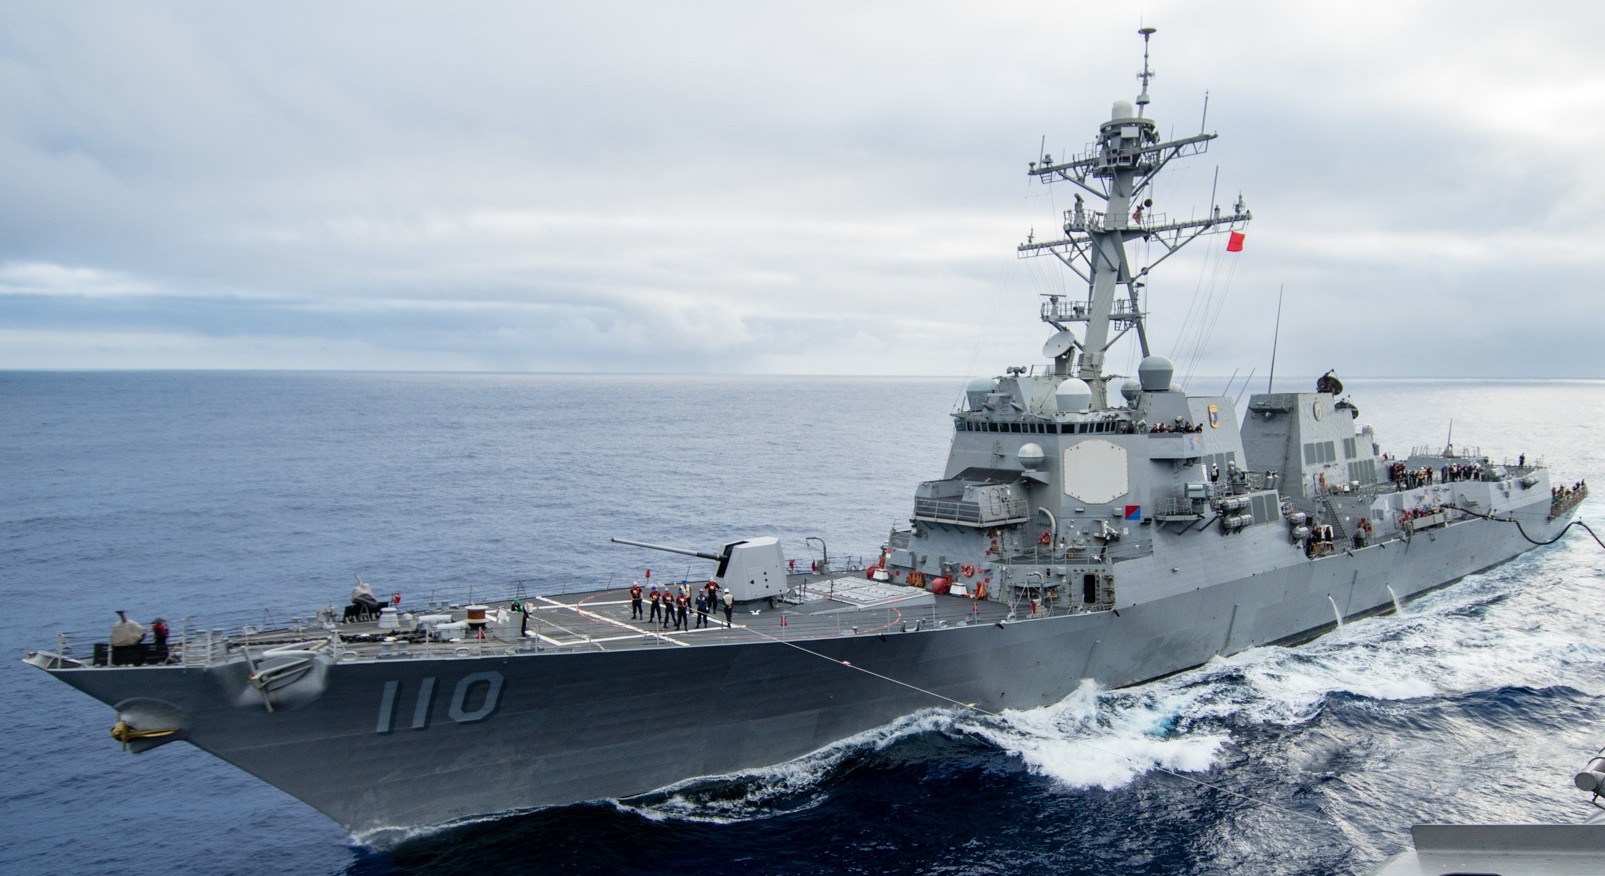 ddg-110 uss william p. lawrence arleigh burke class guided missile destroyer aegis us navy 11